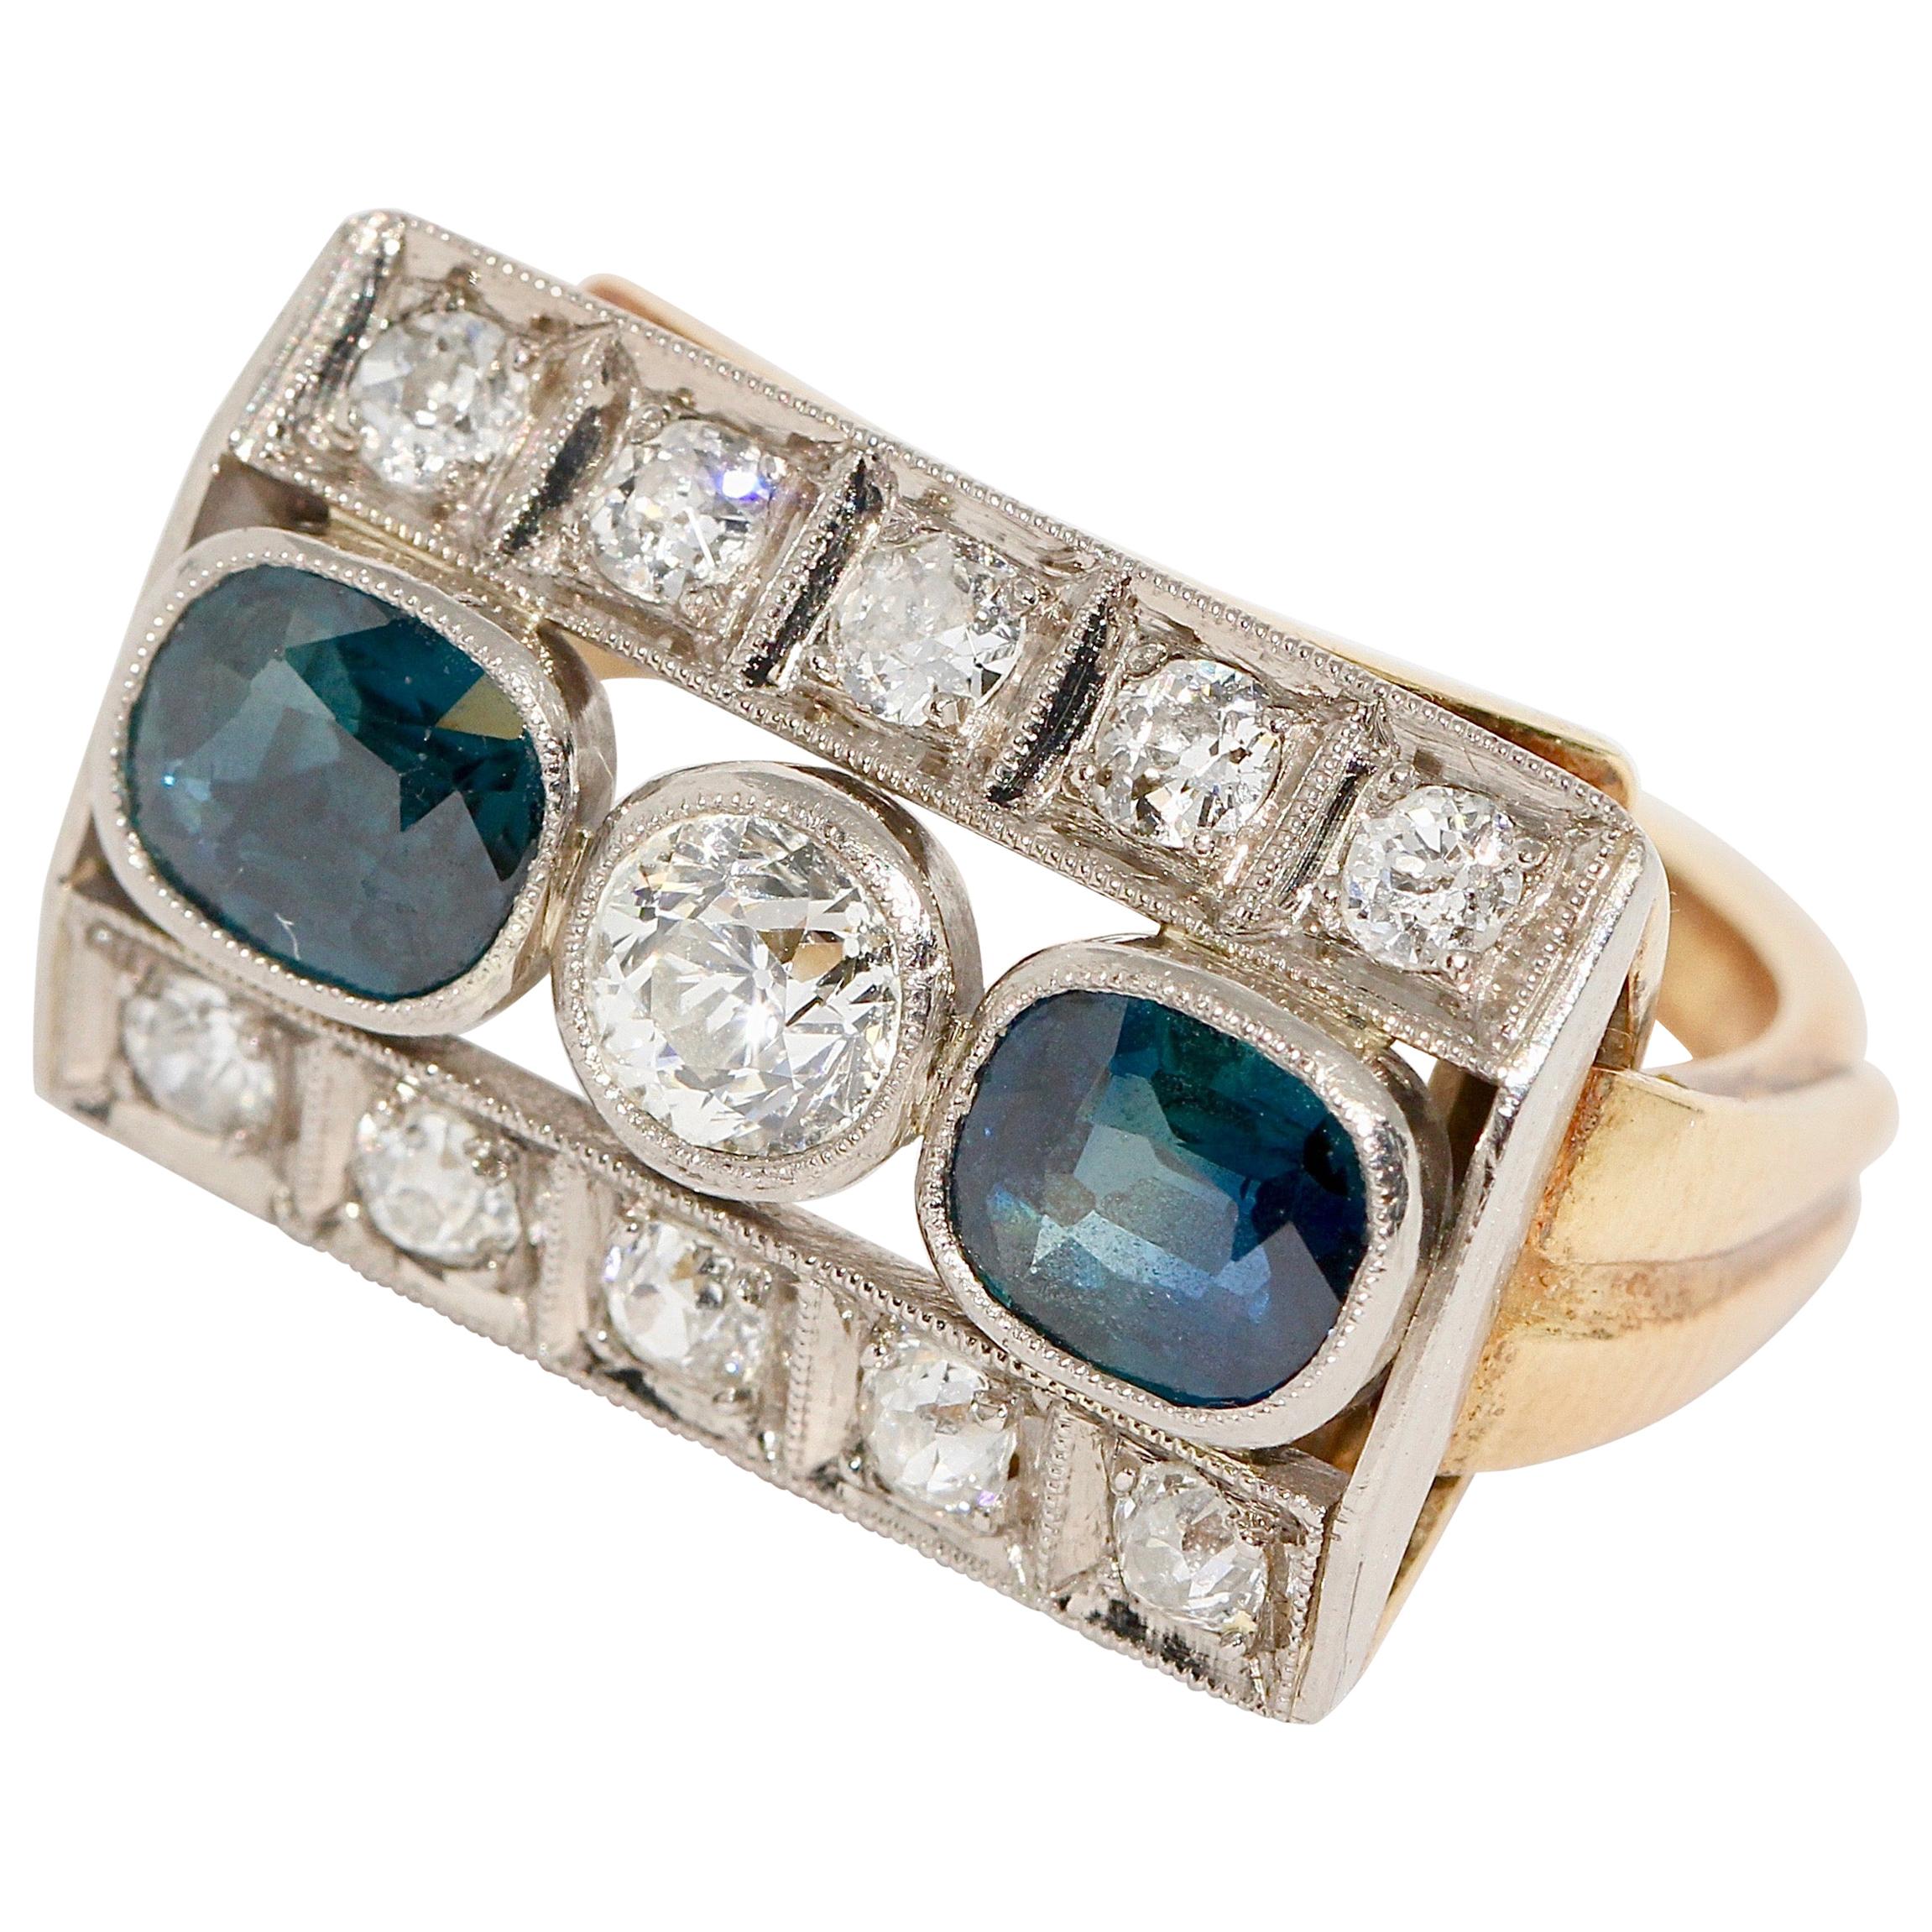 Antique Ladies Gold Ring, with Sapphires and Diamonds